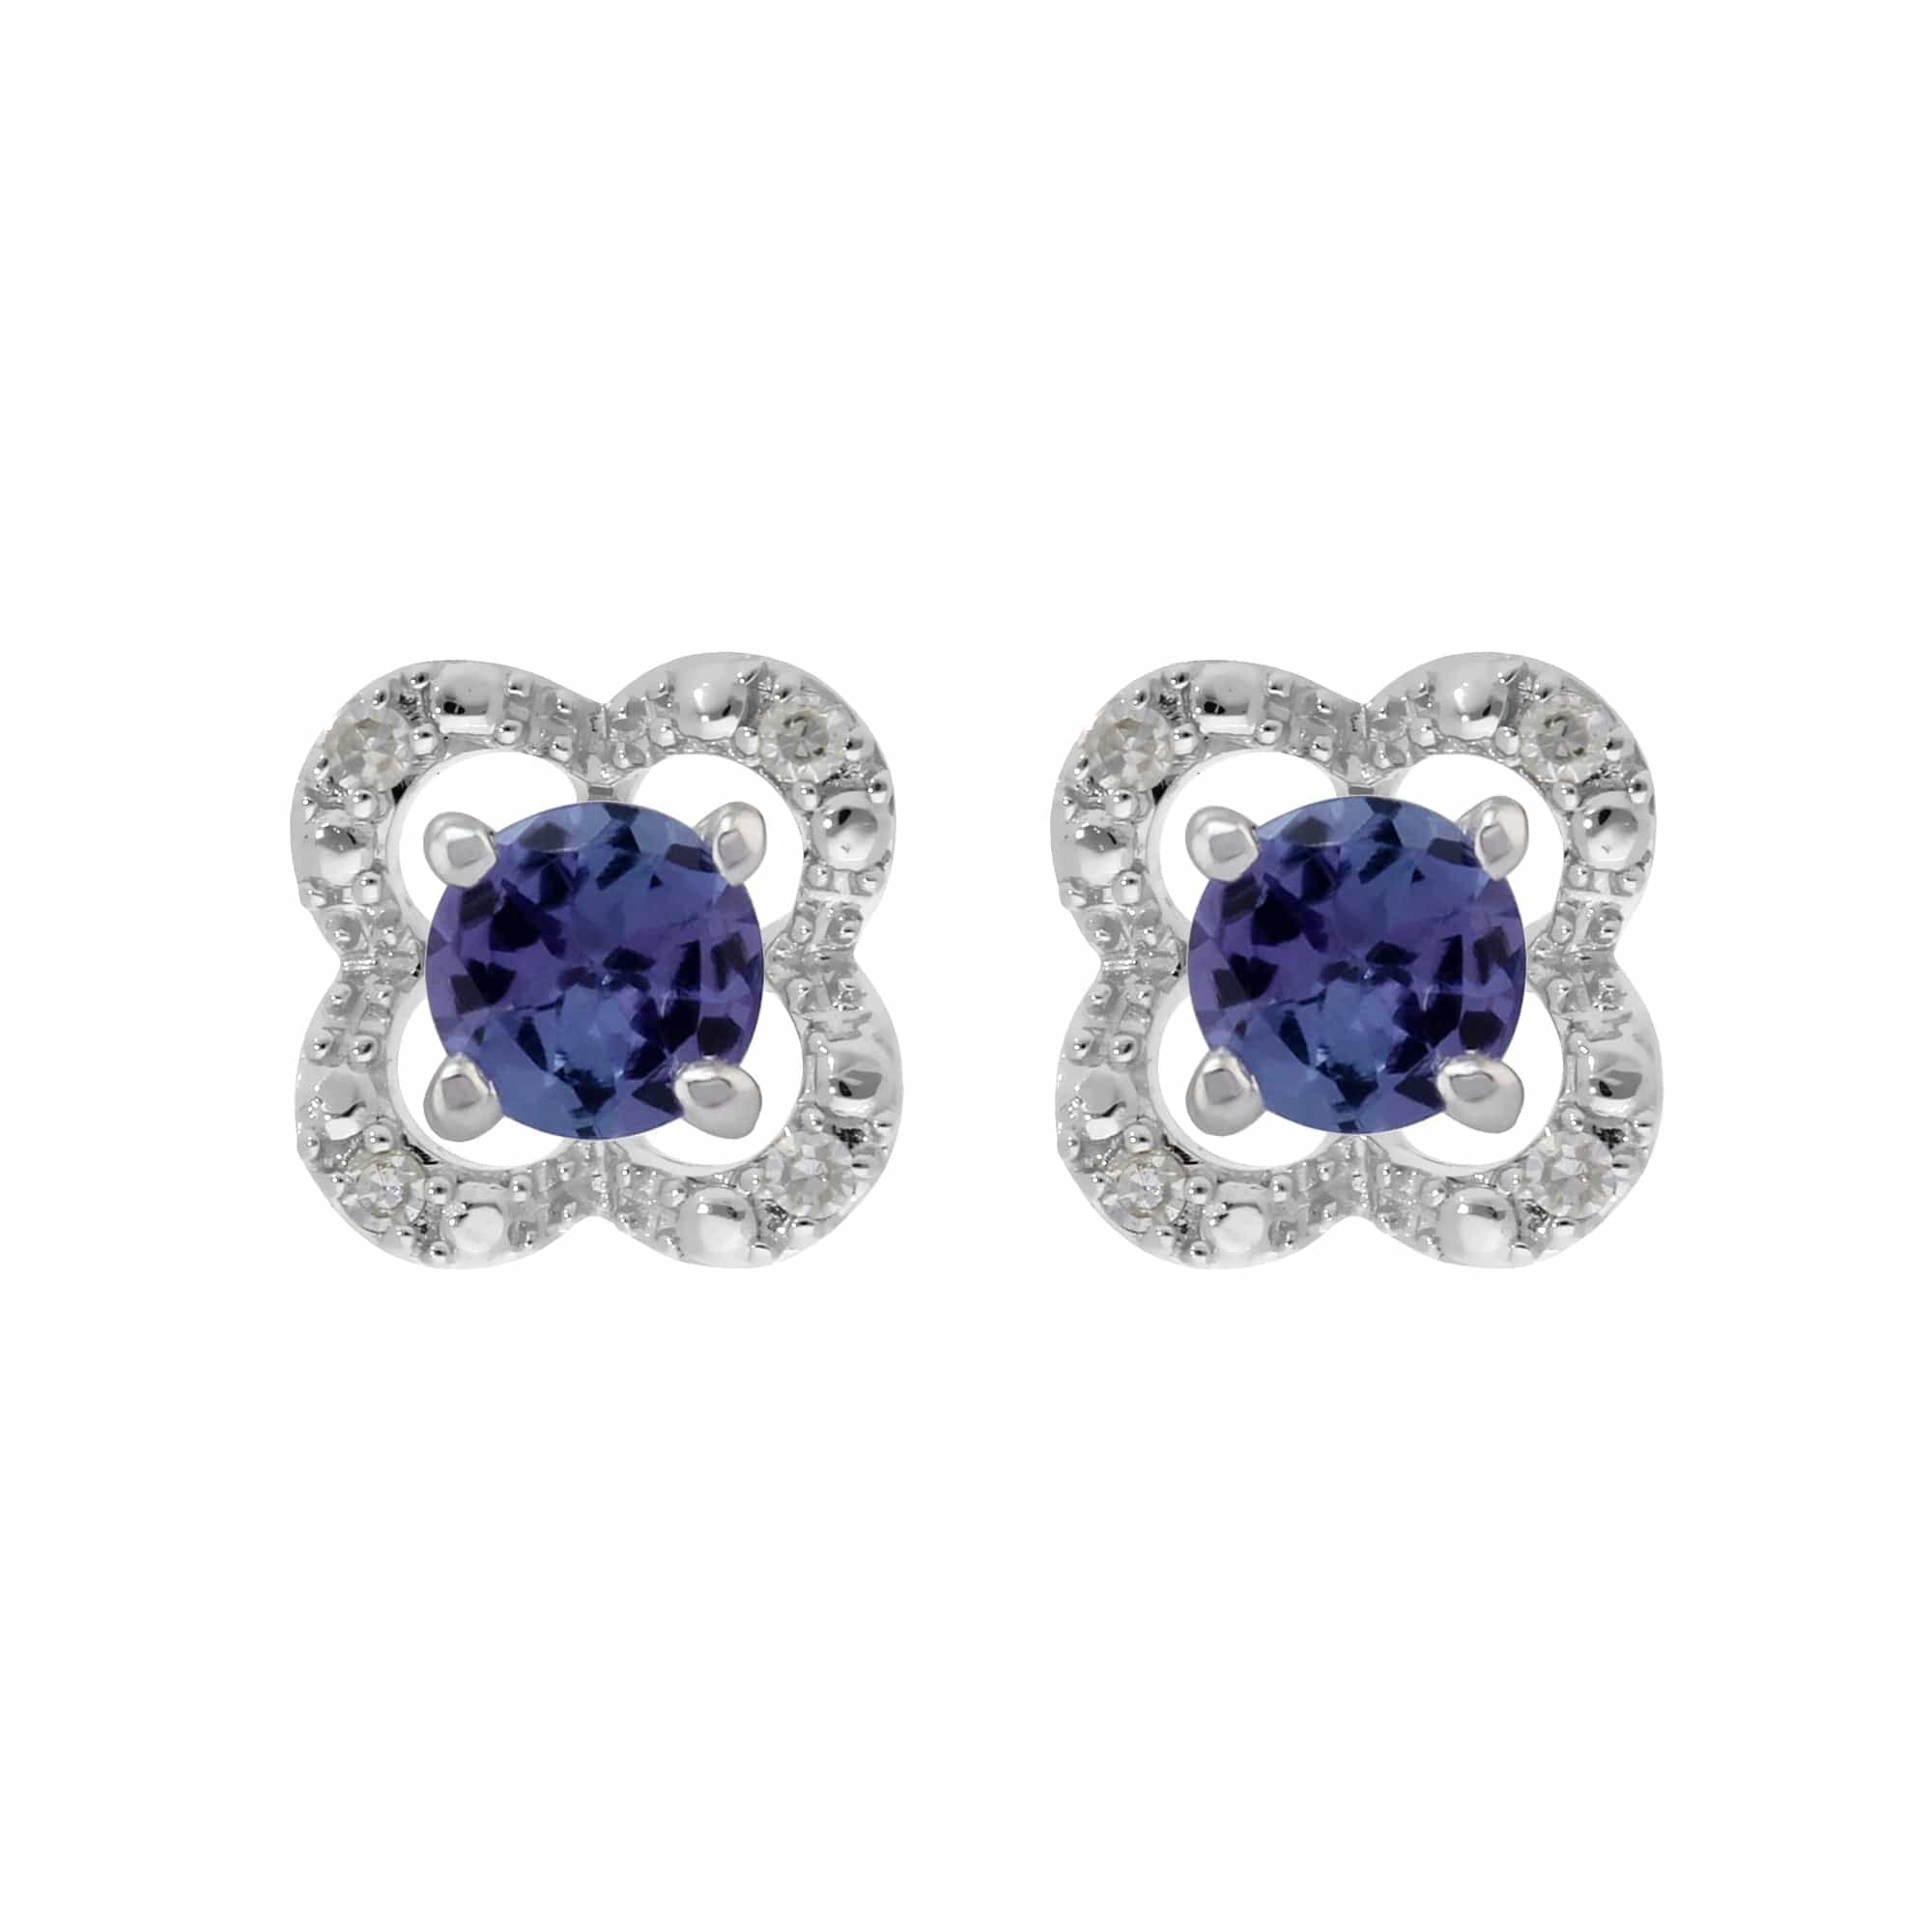 18937-162E0244019 Classic Round Tanzanite Stud Earrings with Detachable Diamond Flower Ear Jacket in 9ct White Gold 1